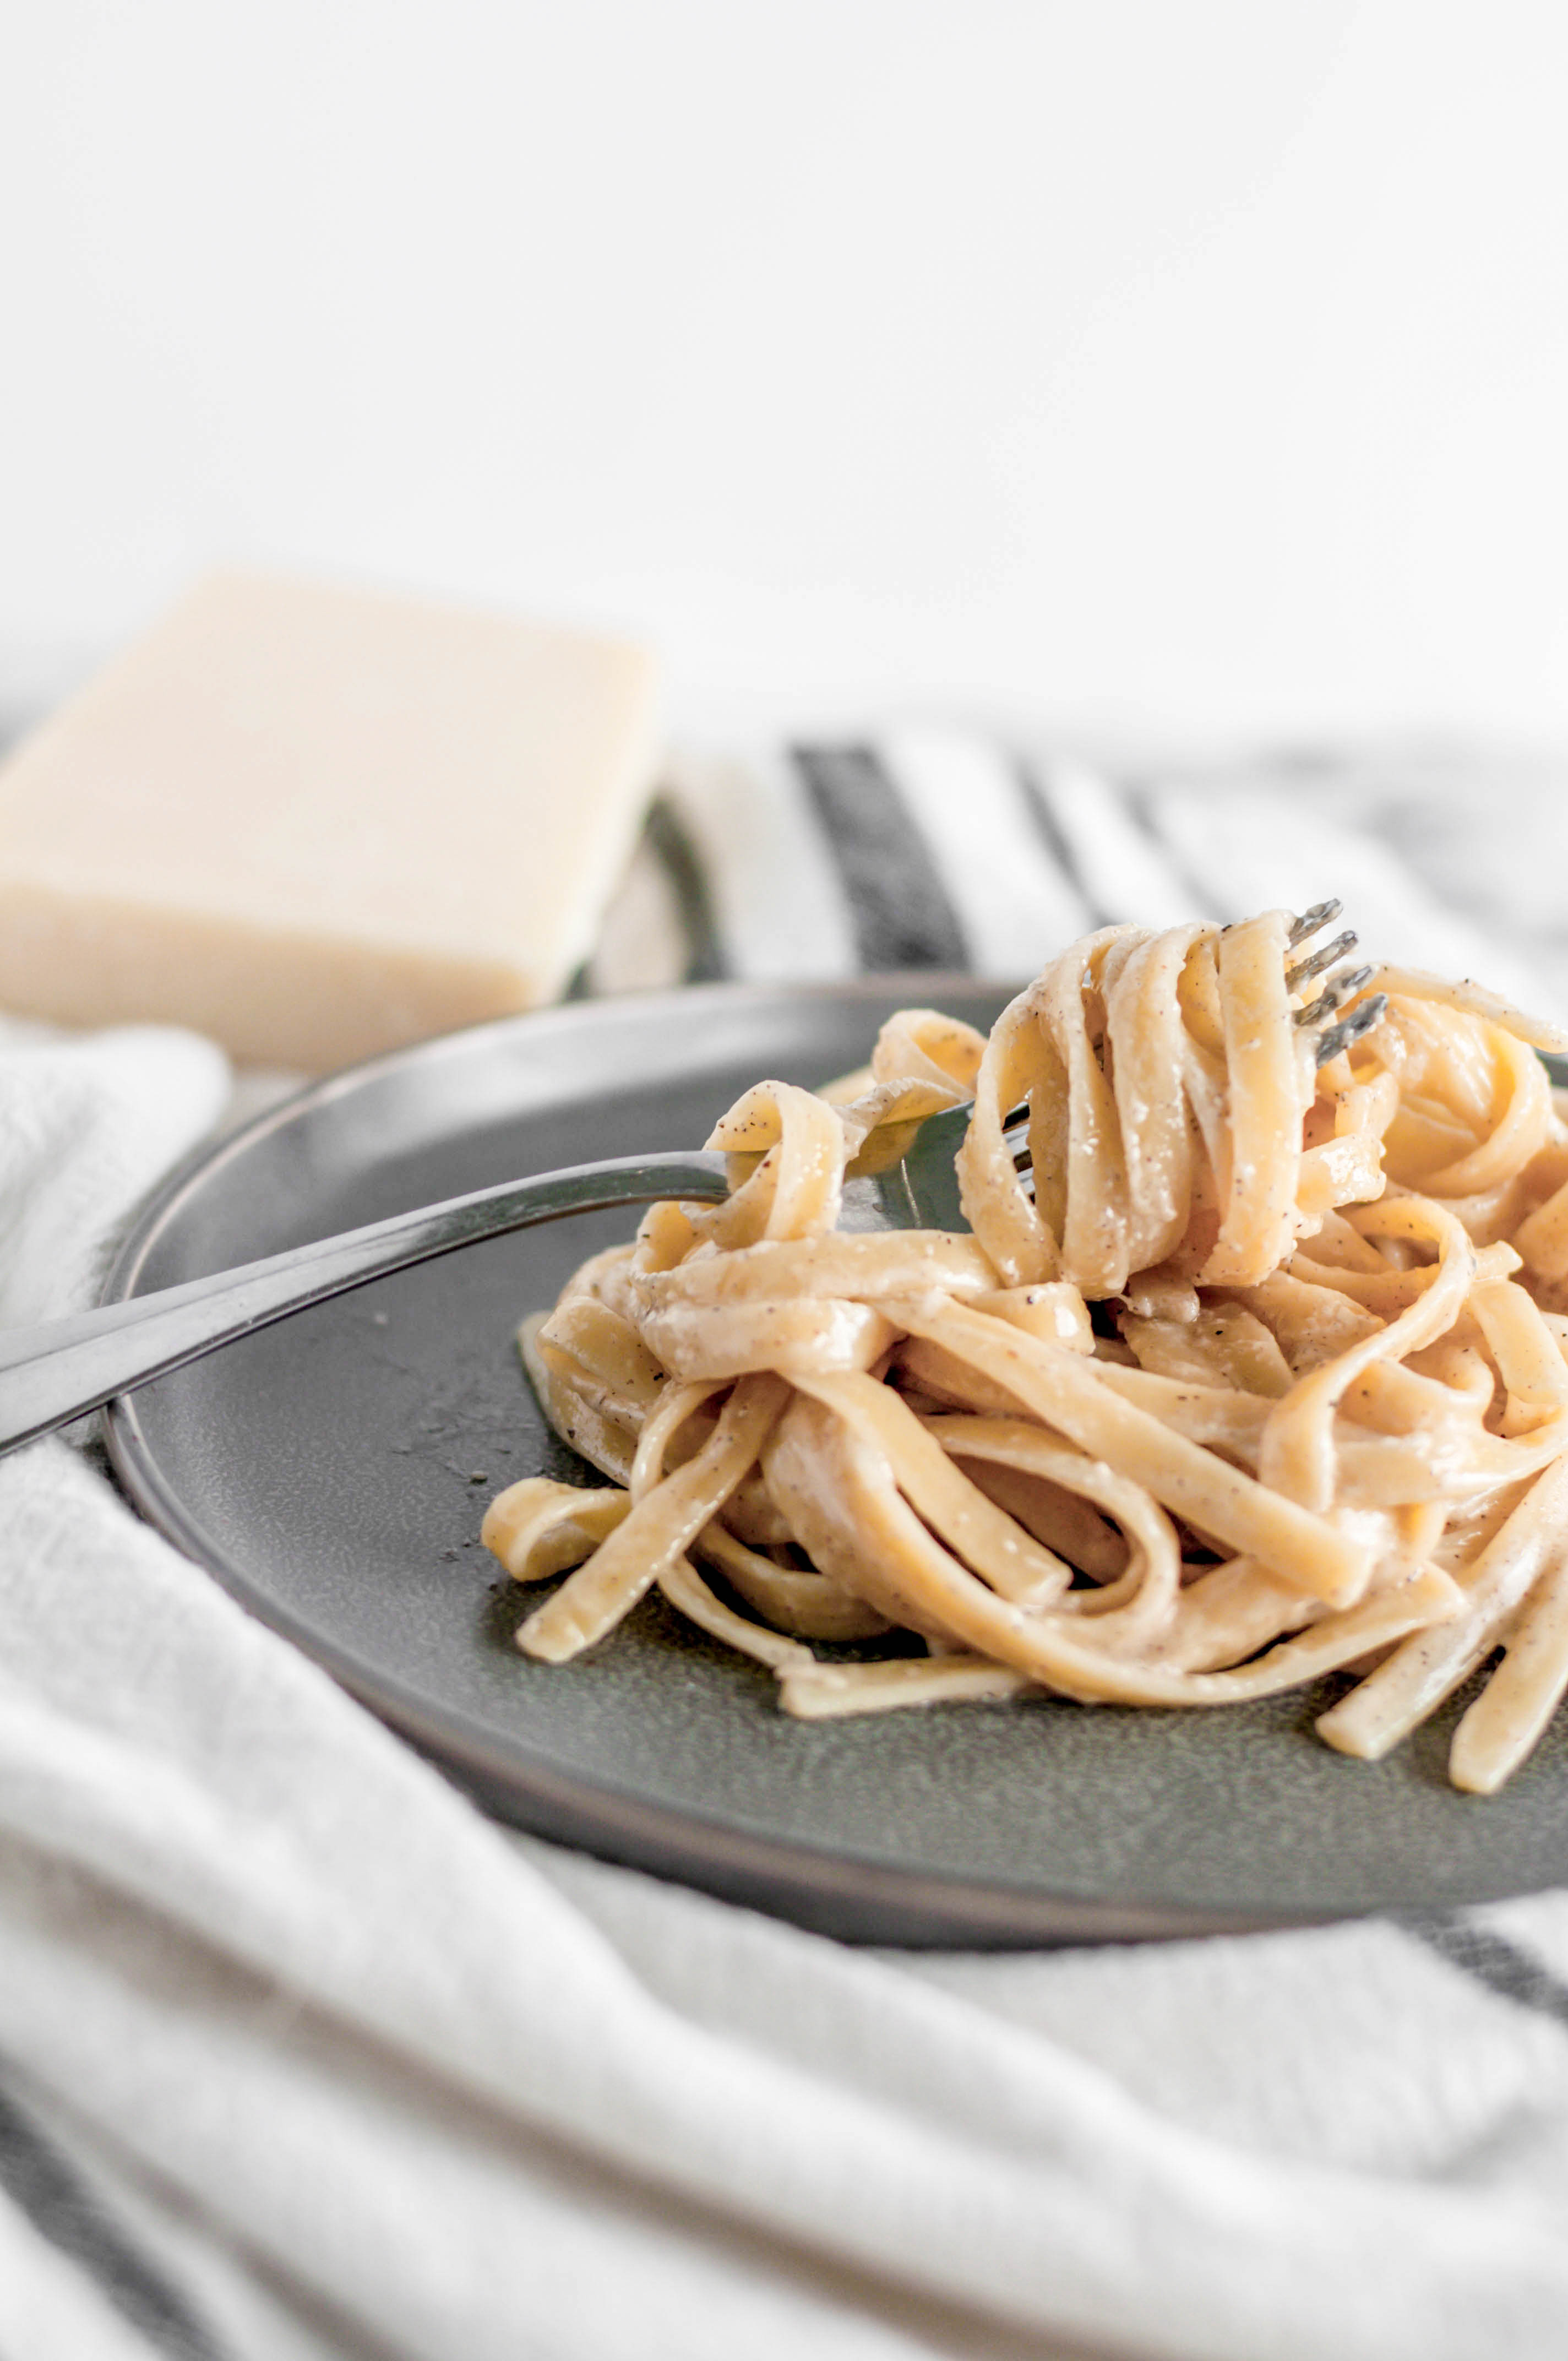 Roasted Garlic Alfredo will quickly become your go to weeknight meal. Garlicky, cheesy, nutty and done in less than 30 minutes.